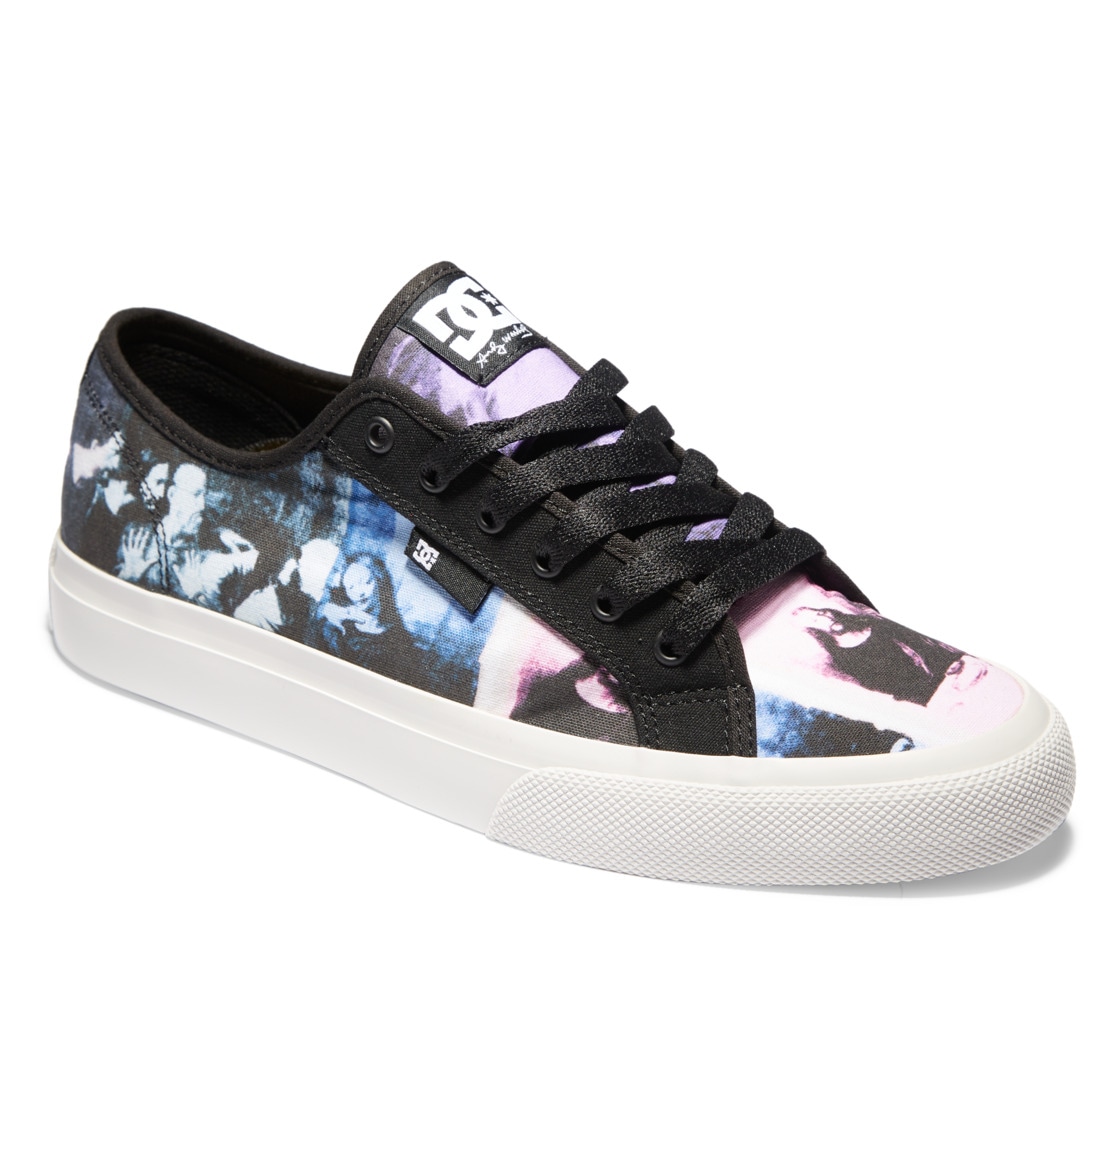 DC Shoes Sneaker »Andy Warhol Manual« von DC Shoes